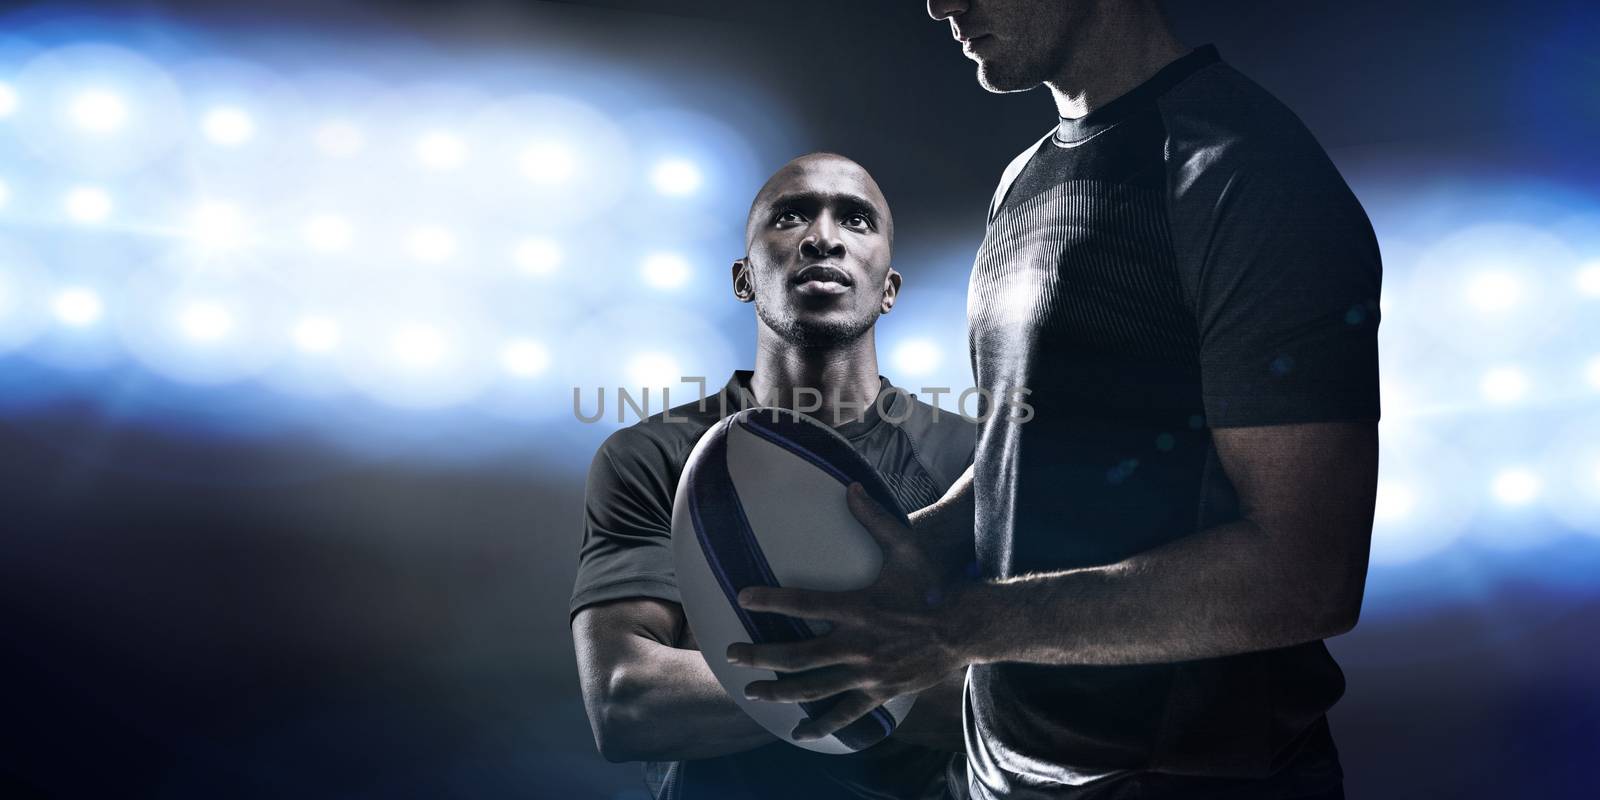 Calm rugby player thinking while holding ball against spotlights